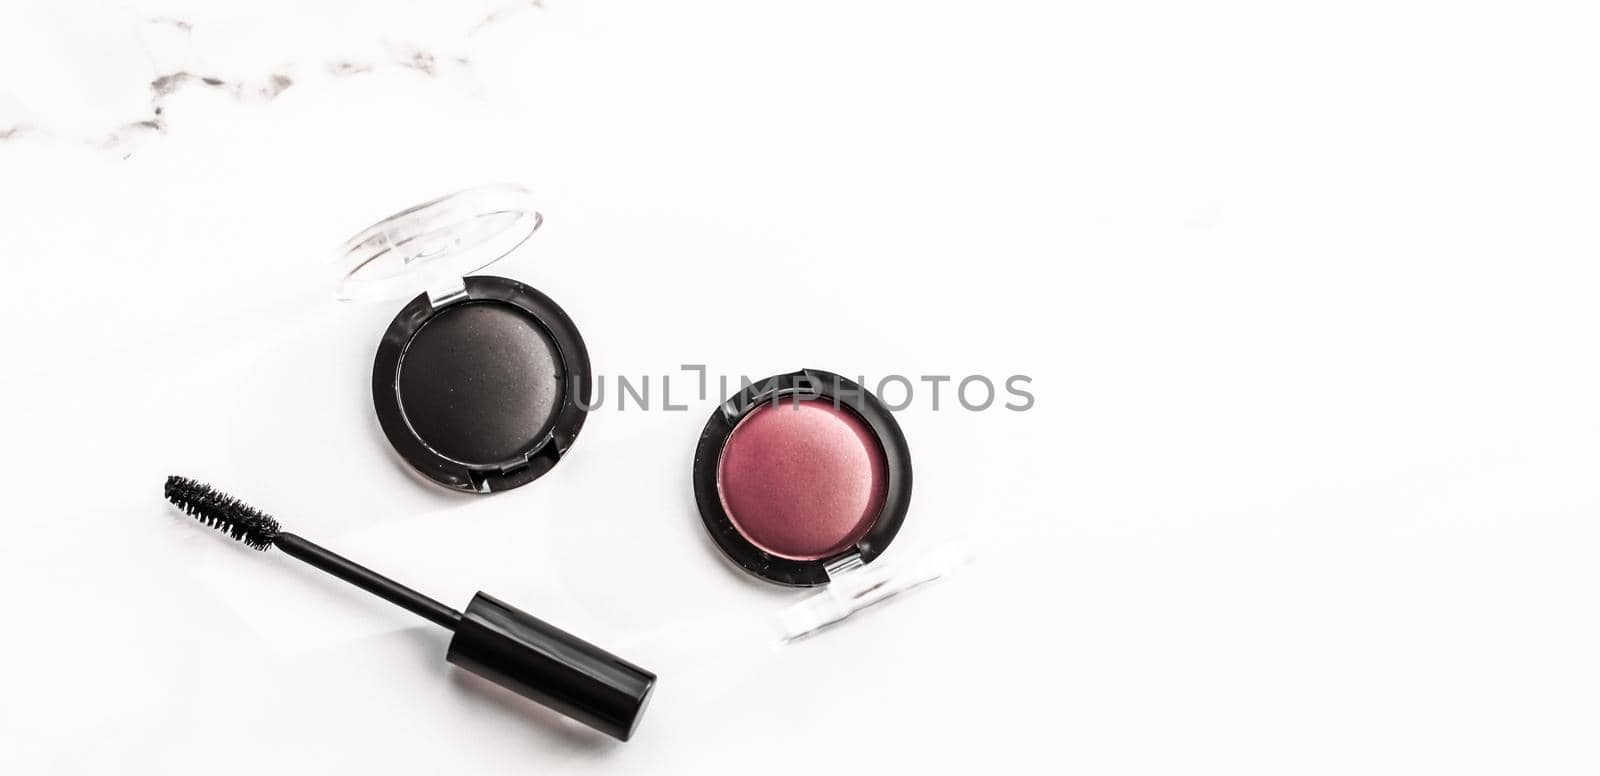 Cosmetic branding, blog and girly concept - Eyeshadows, black liner and mascara on marble background, eye shadows cosmetics as glamour make-up products for luxury beauty brand, holiday flatlay design